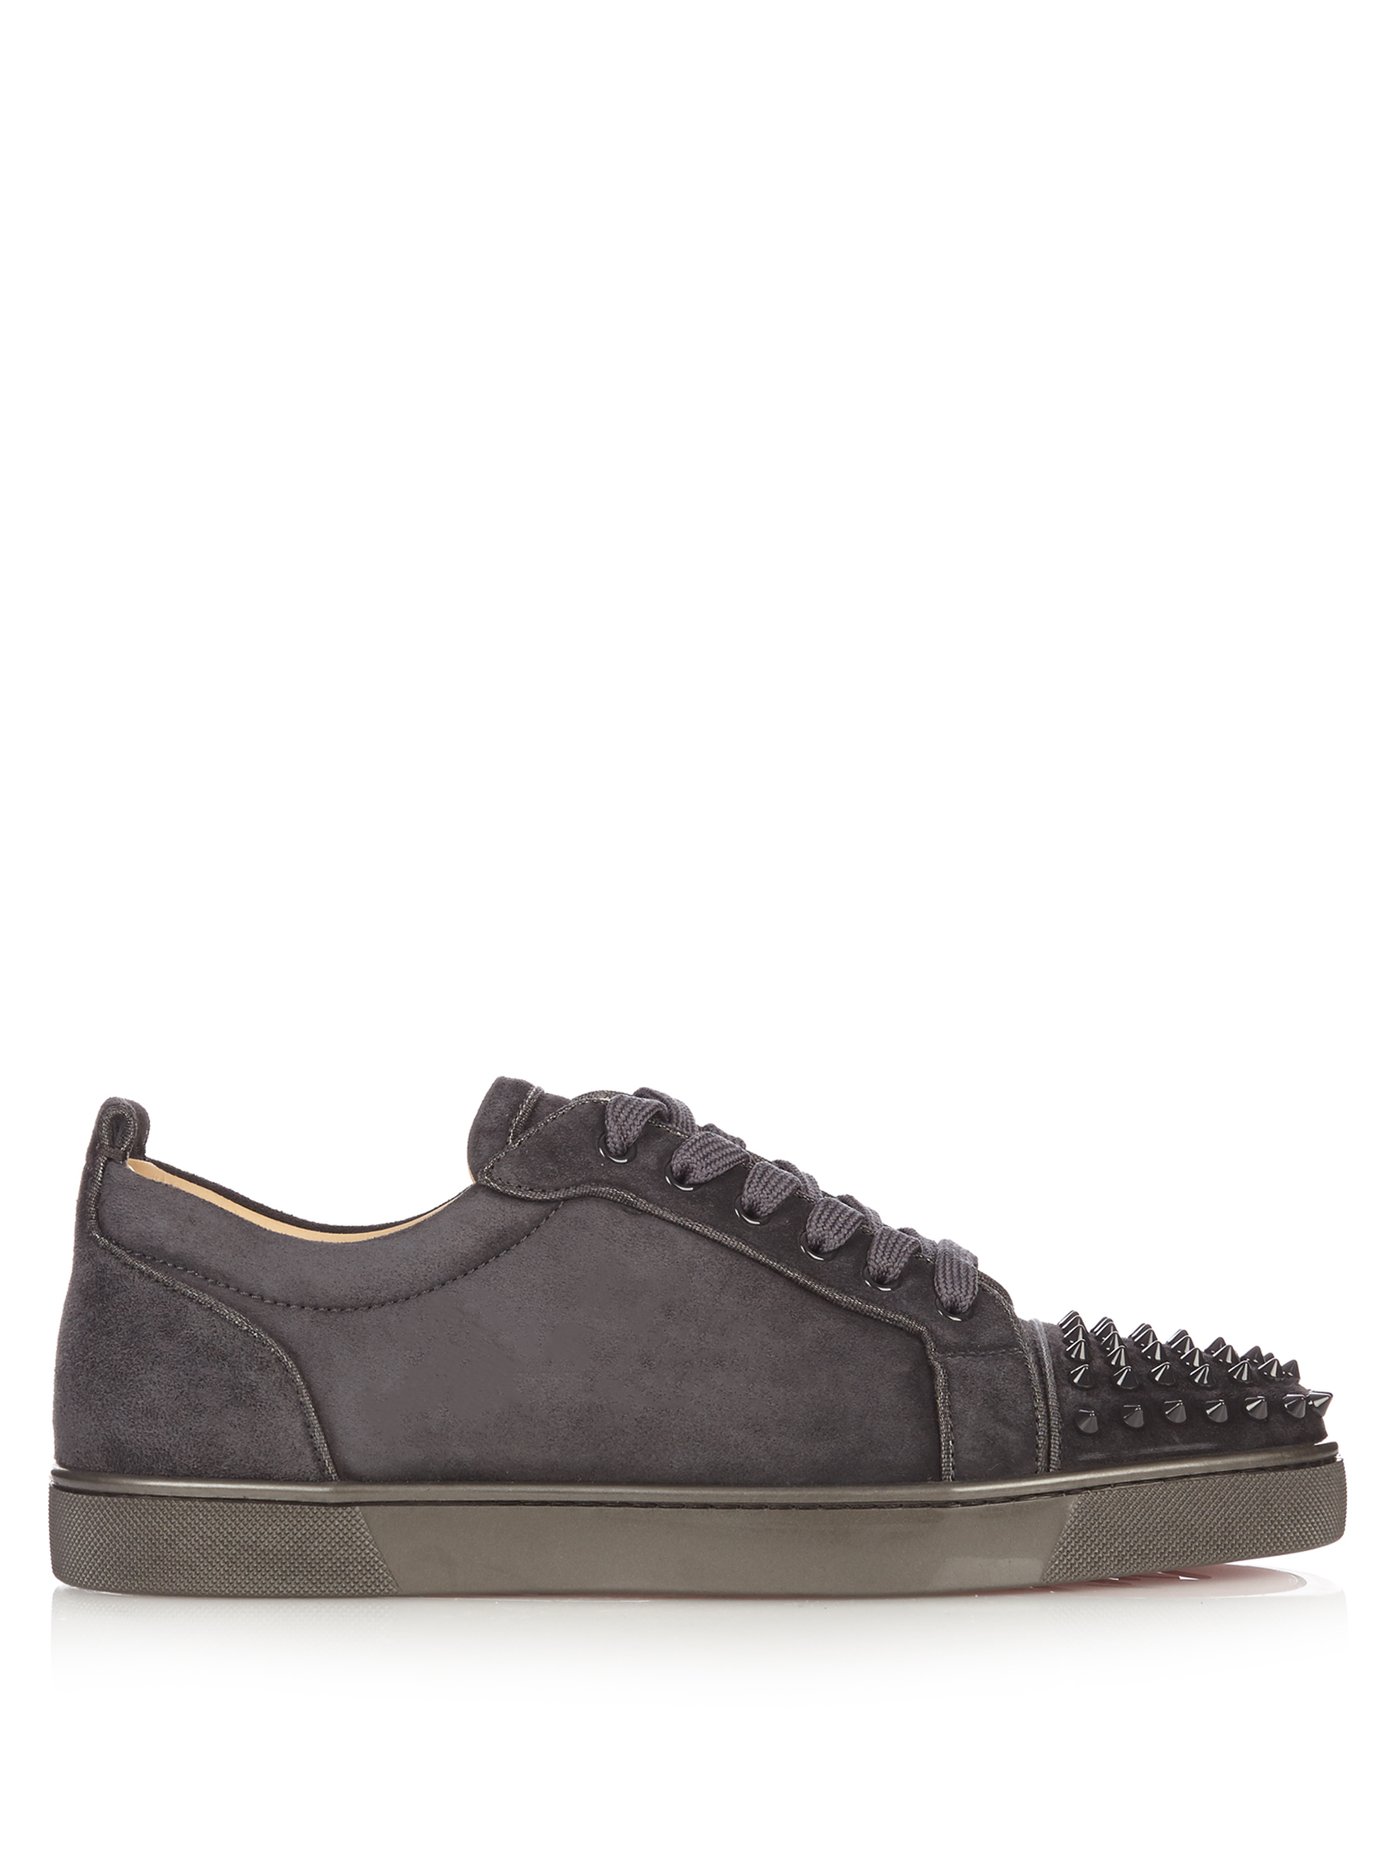 louboutin grey suede low